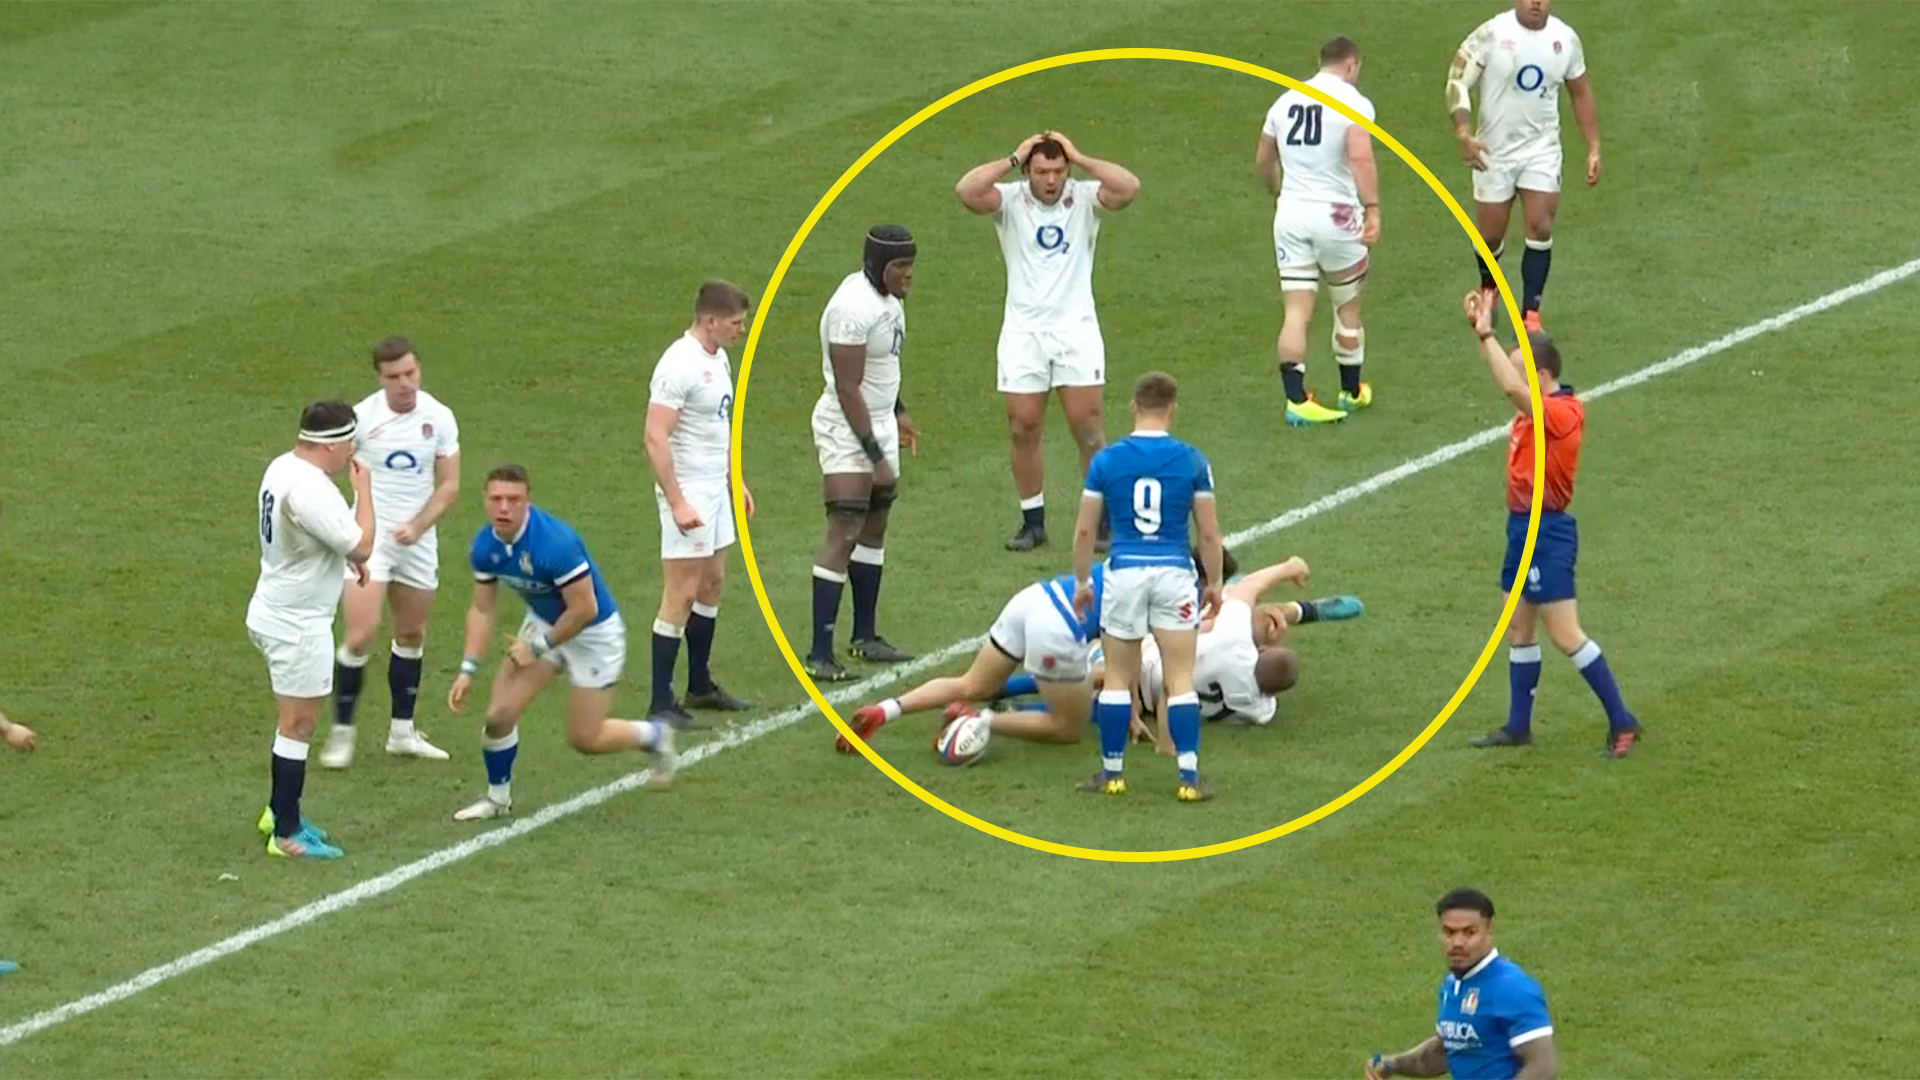 Calls to ban 'crocodile roll' after horrific Jack Willis injury in the Six Nations today